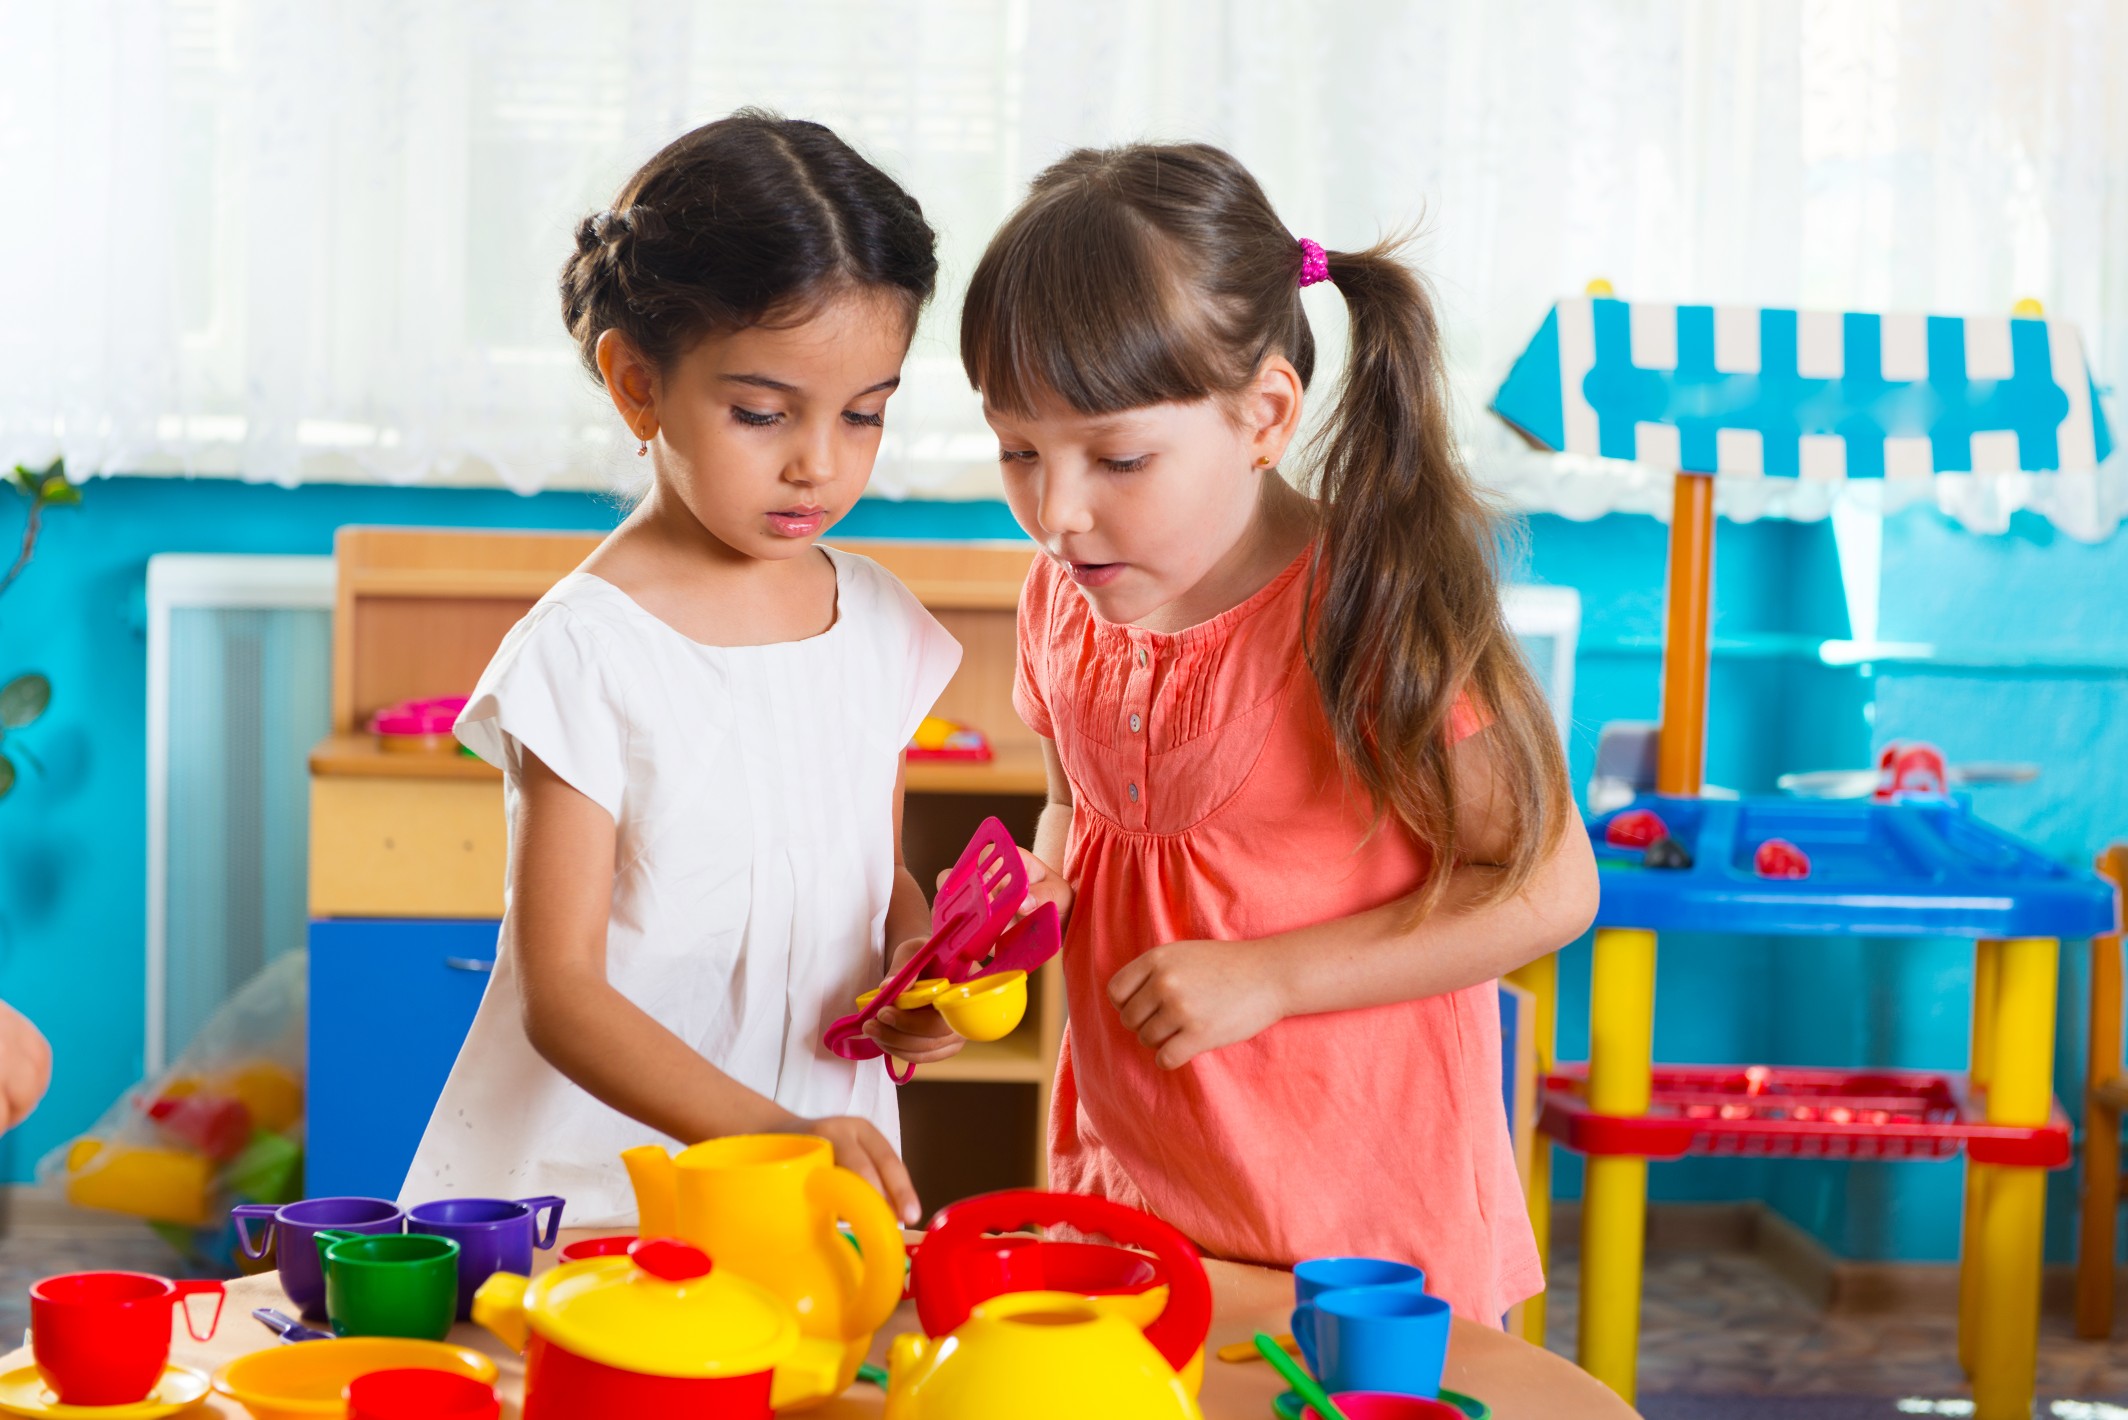 Children will learn from their peers and have more advanced conversations with one another.